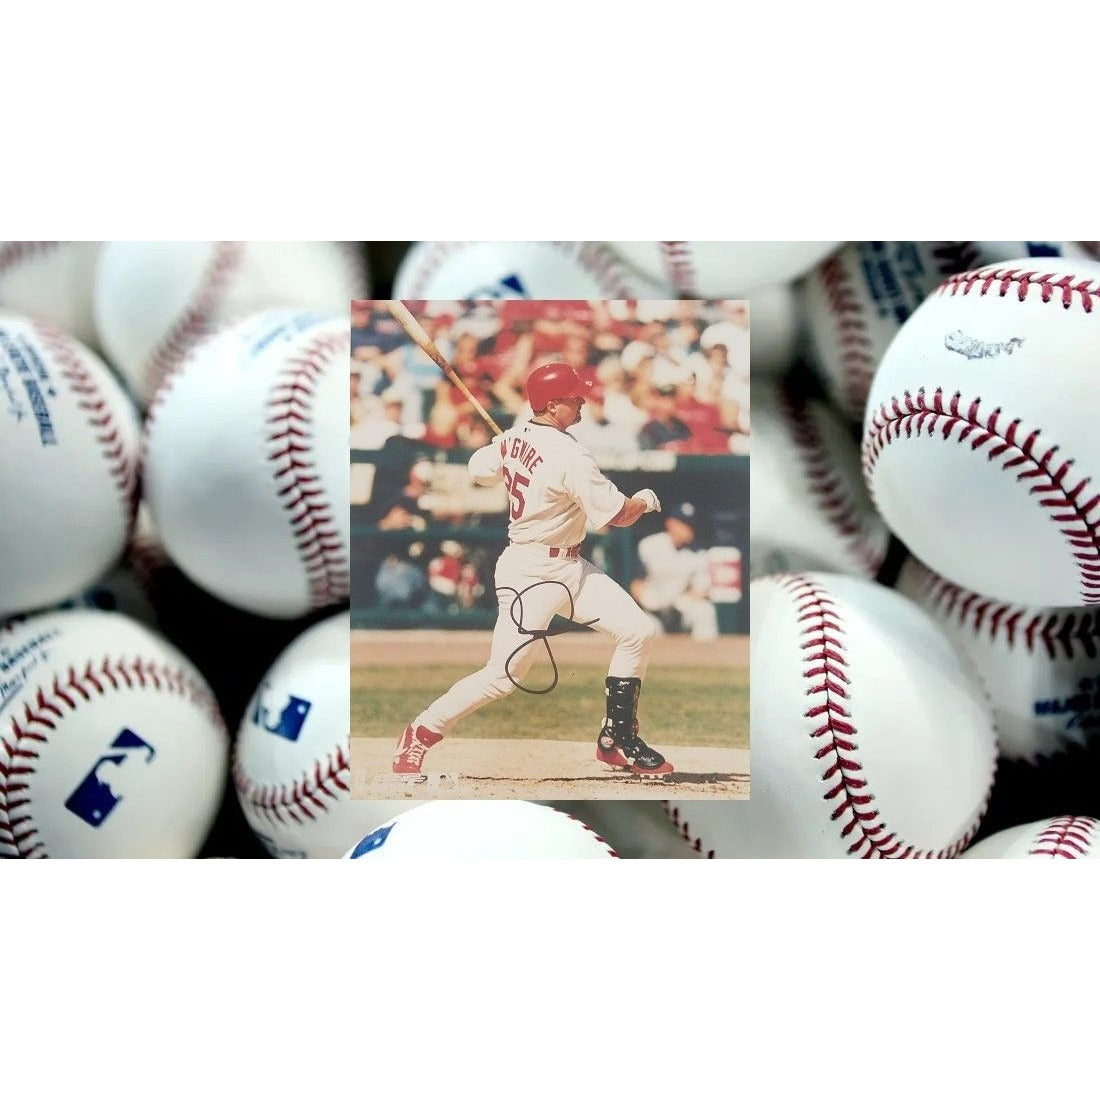 Mark McGwire St Louis Cardinals 8 x 10 signed photo